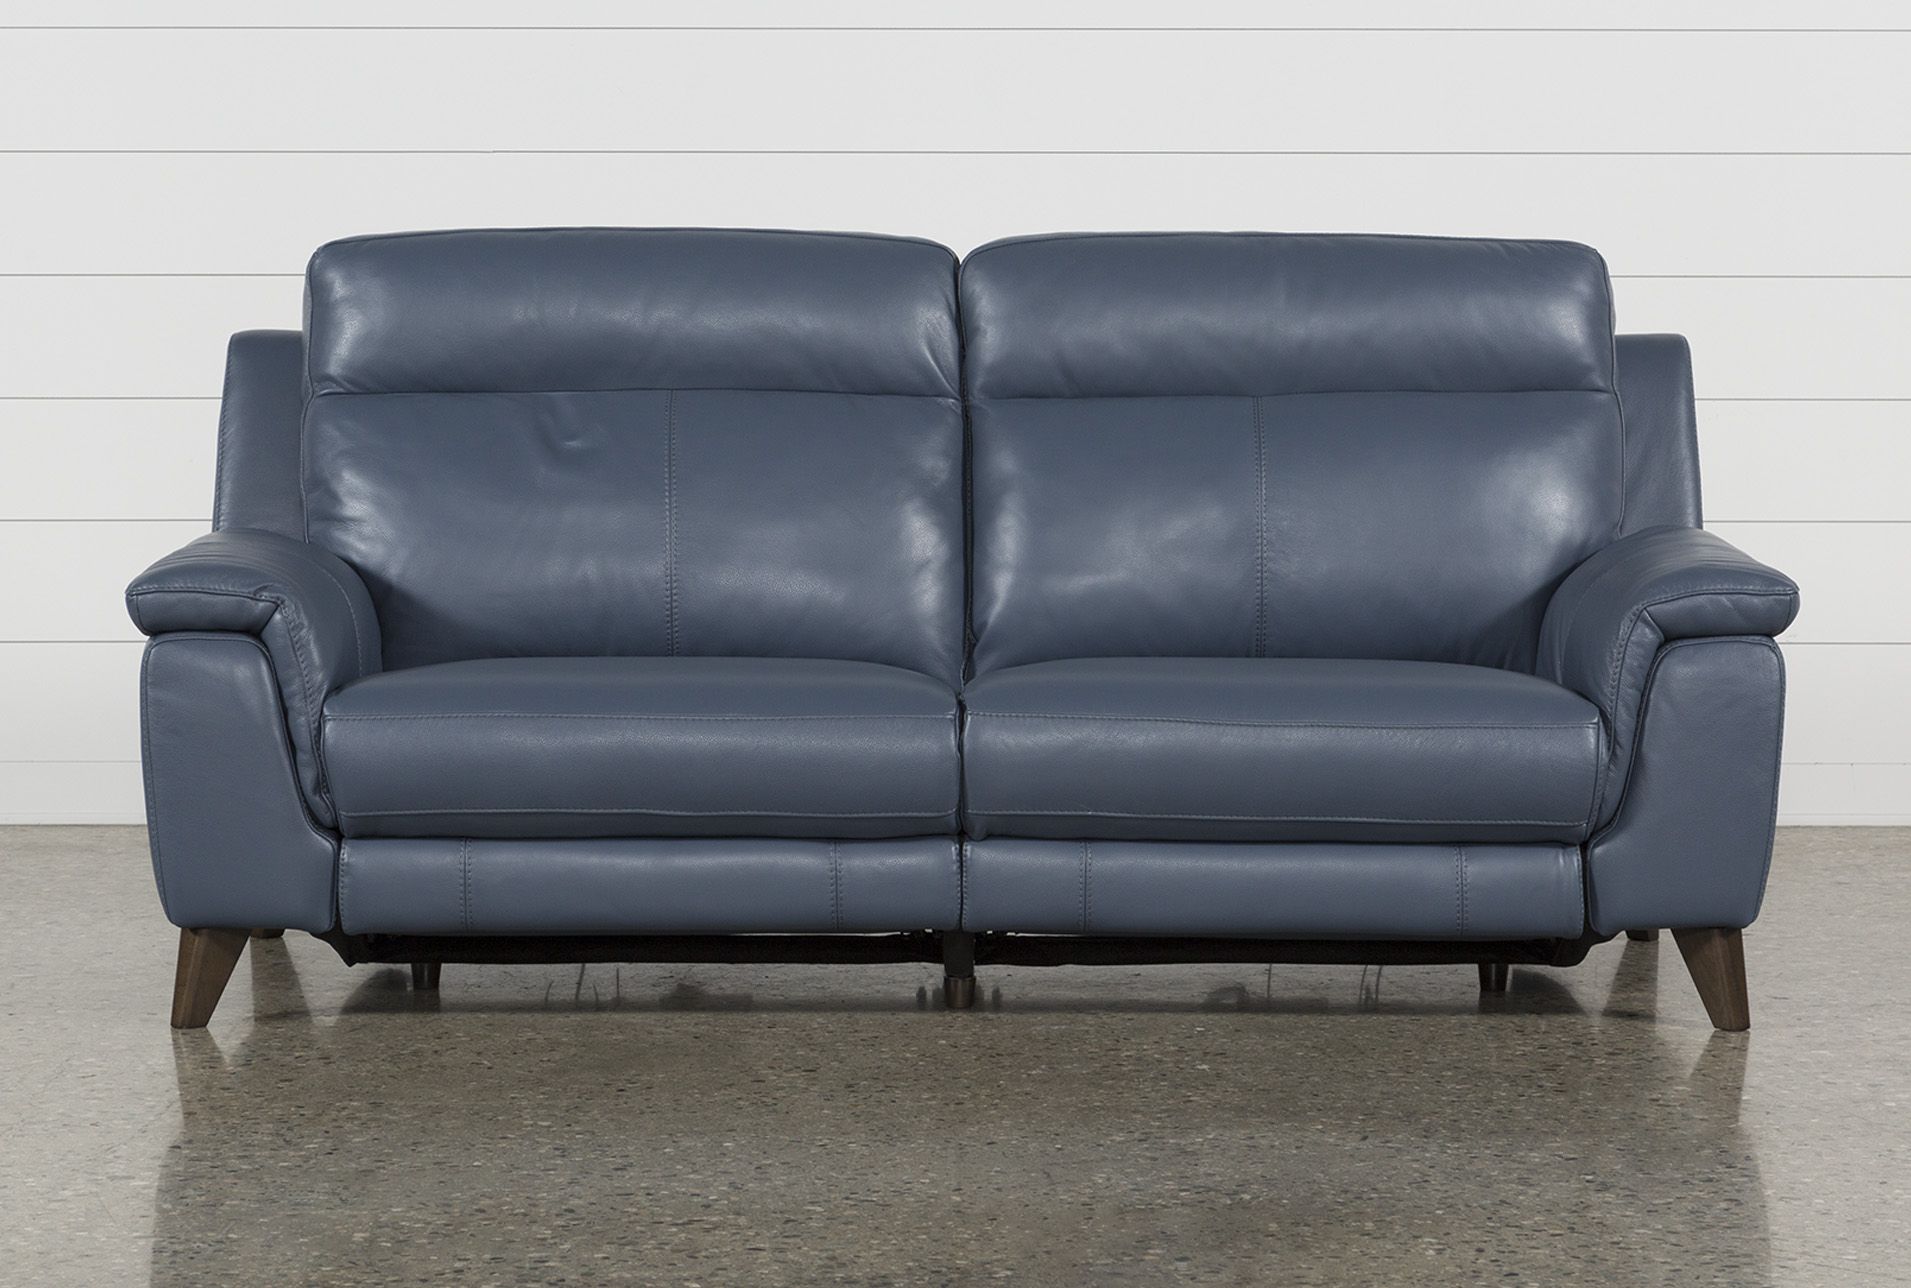 Moana Blue Leather Dual Power Reclining Sofa With Usb In 2018 With Moana Blue Leather Power Reclining Sofa Chairs With Usb (View 3 of 25)